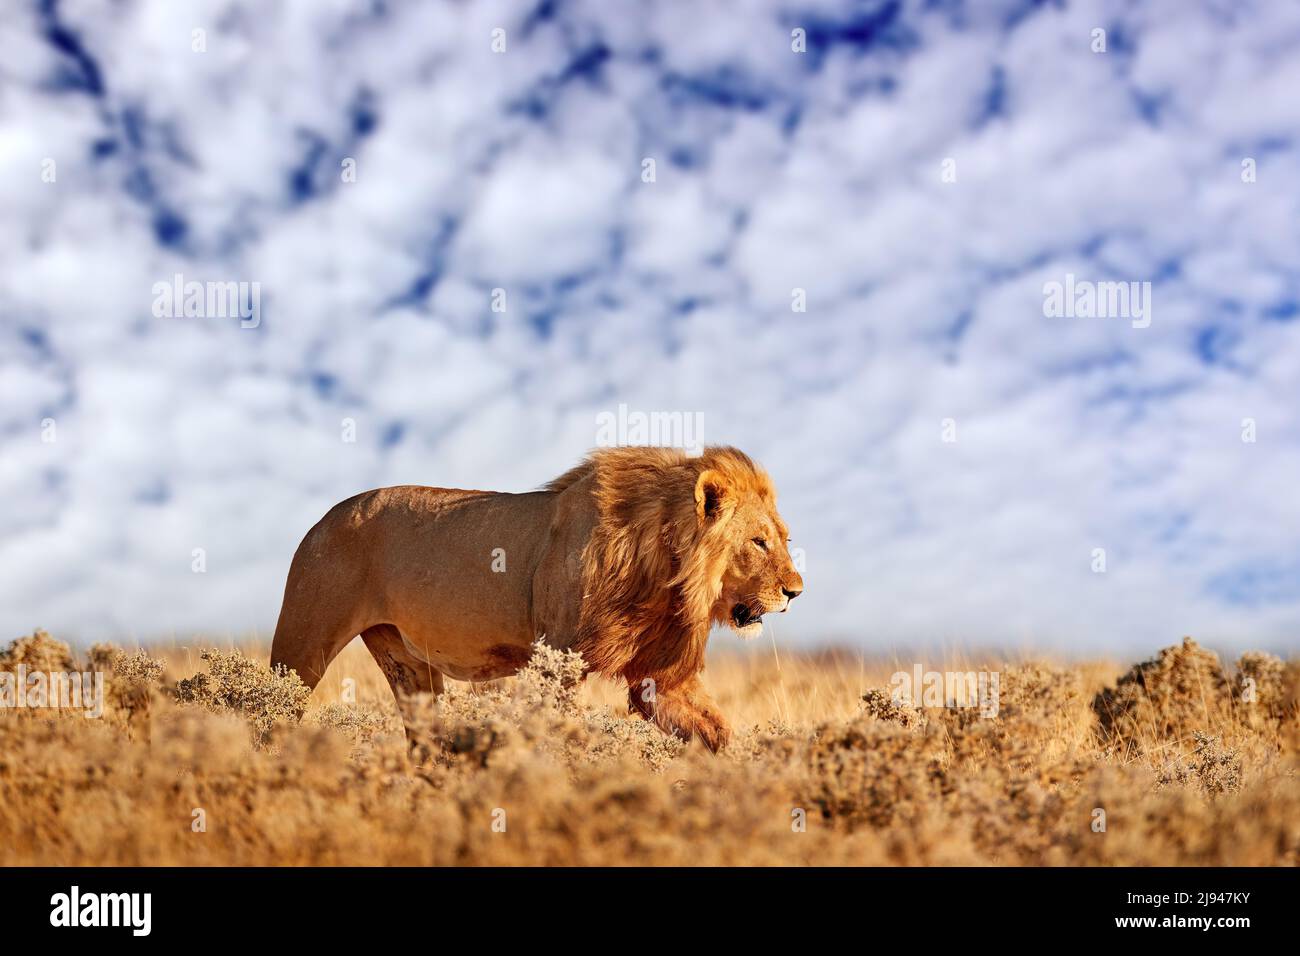 Lion with mane in Etosha, Namibia. African lion walking in the grass, with beautiful evening light, blue sky with white clouds. Wildlife scene from na Stock Photo